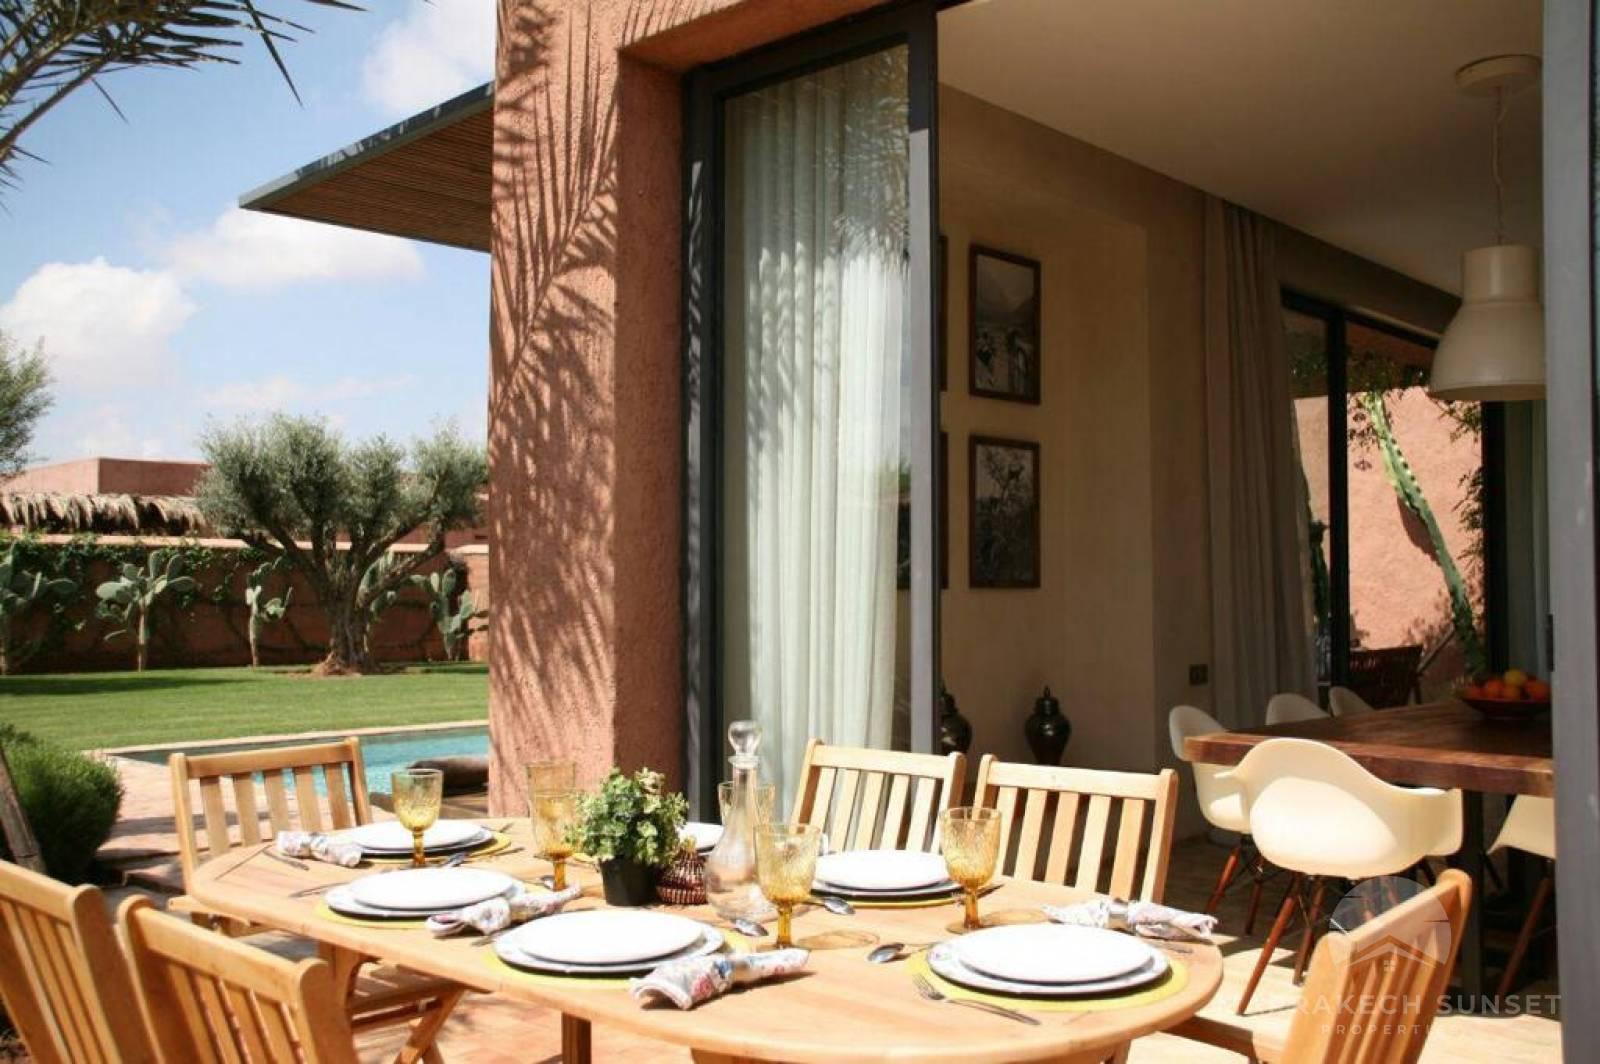 Luxury villa for sale located in one of the most prestigious residential & golf complex in Marrakech.